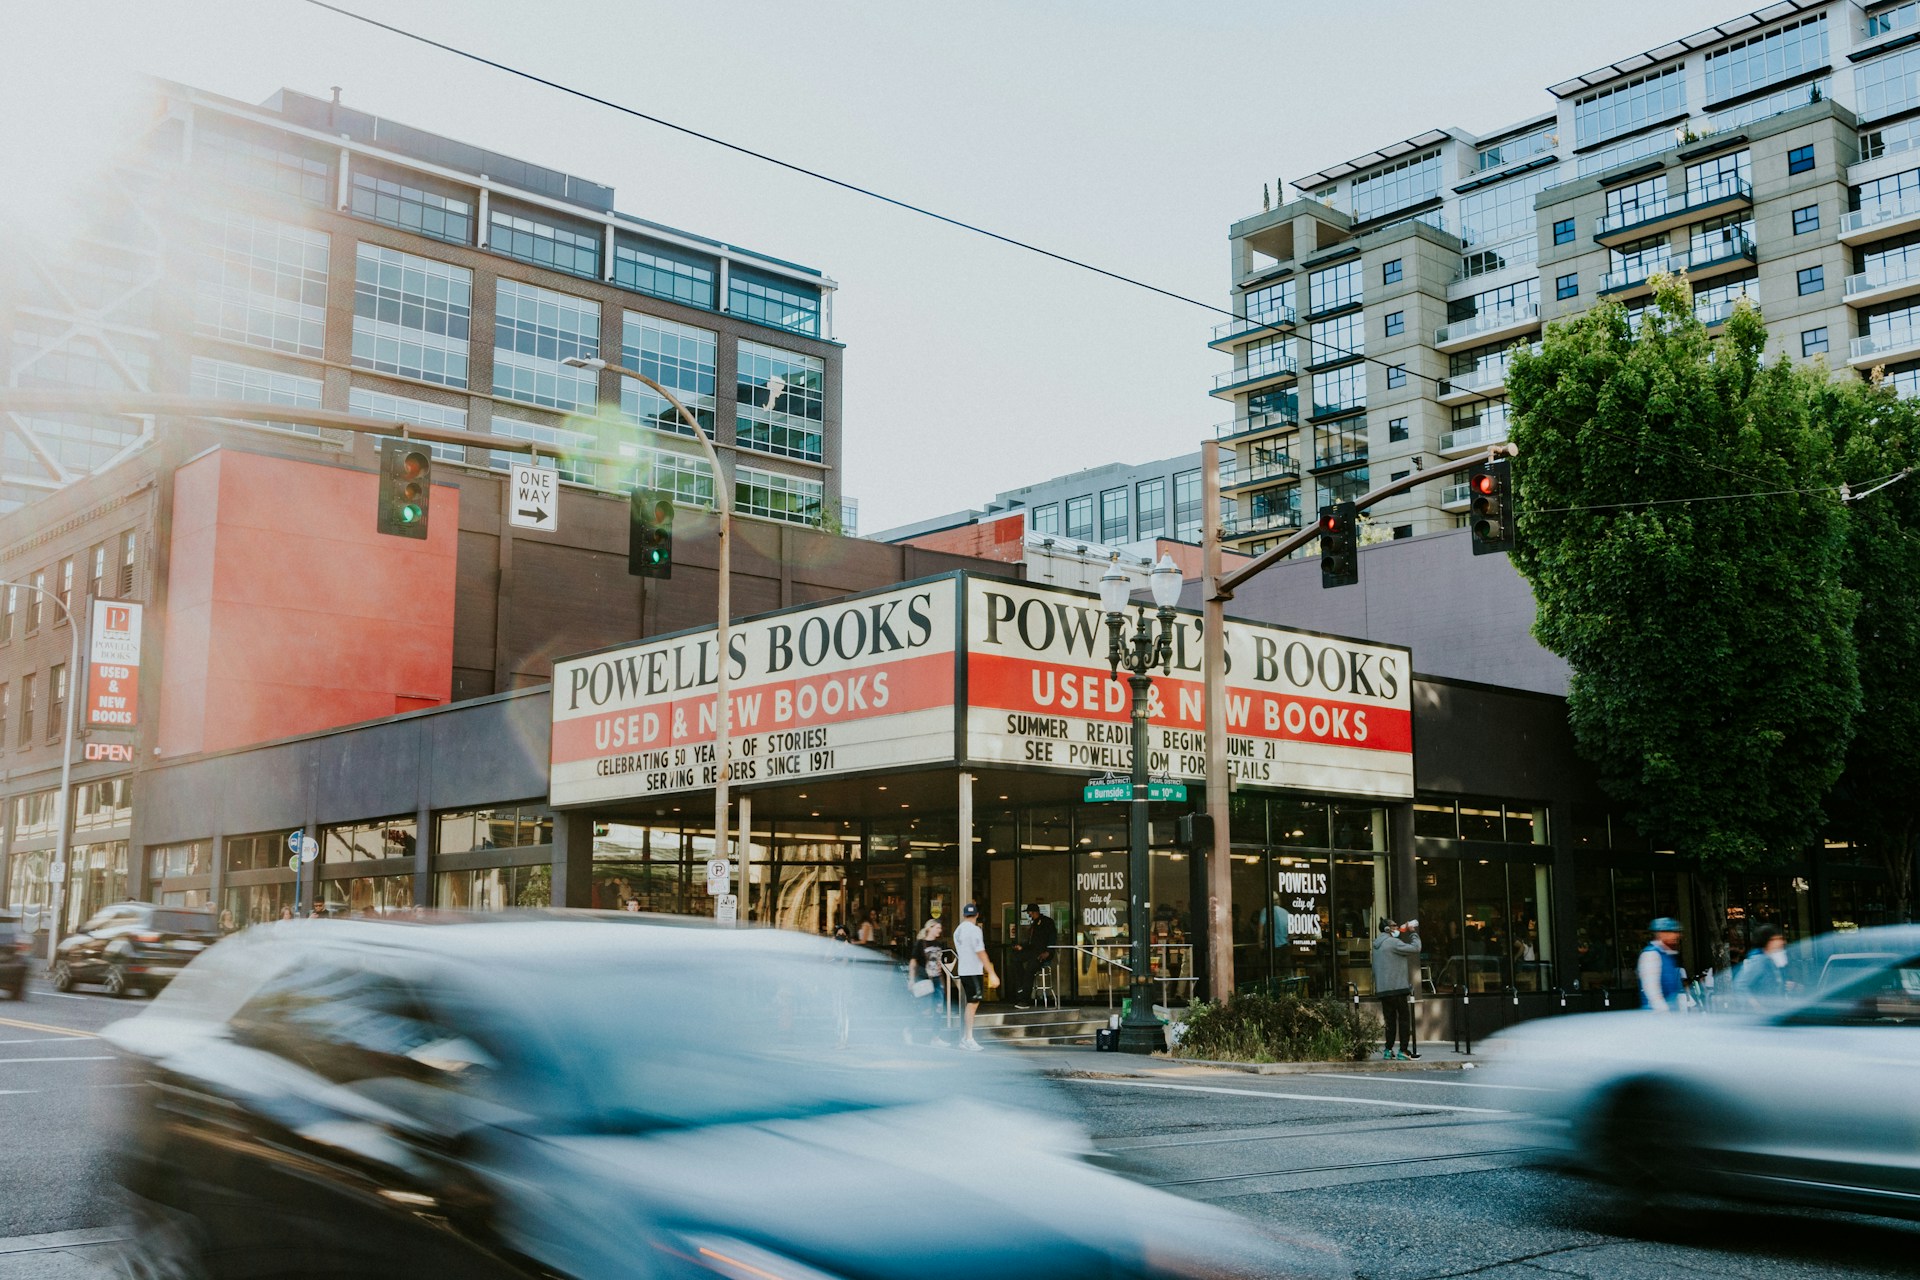 Summer evening at Powell's Books